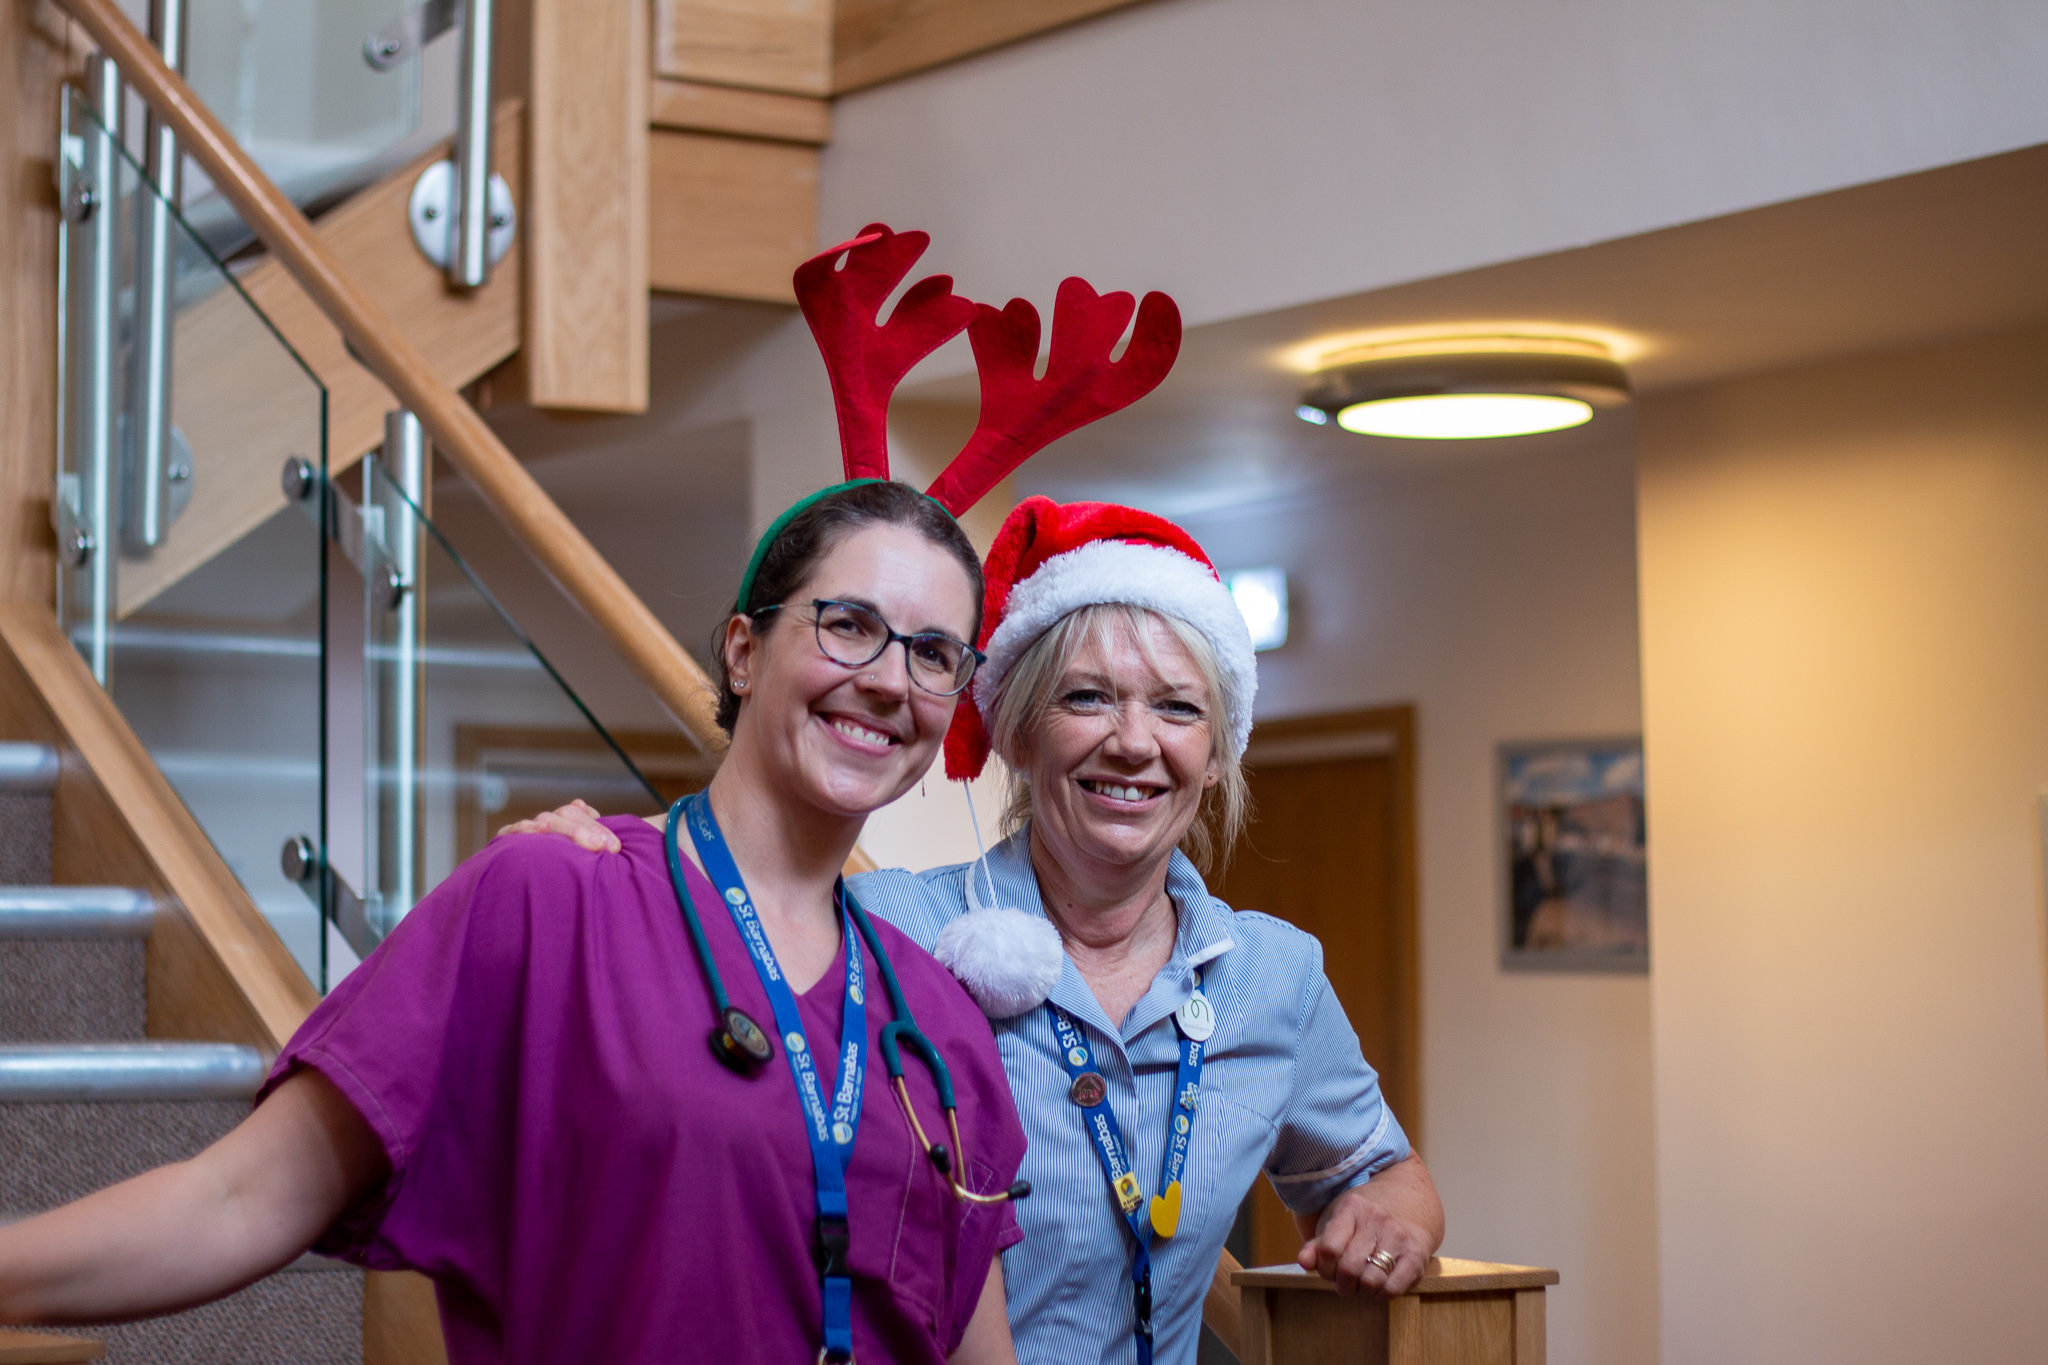 Two women wearing clinical scrubs in purple and blue, and festive reindeer antlers and Christmas hat, standing in stairway